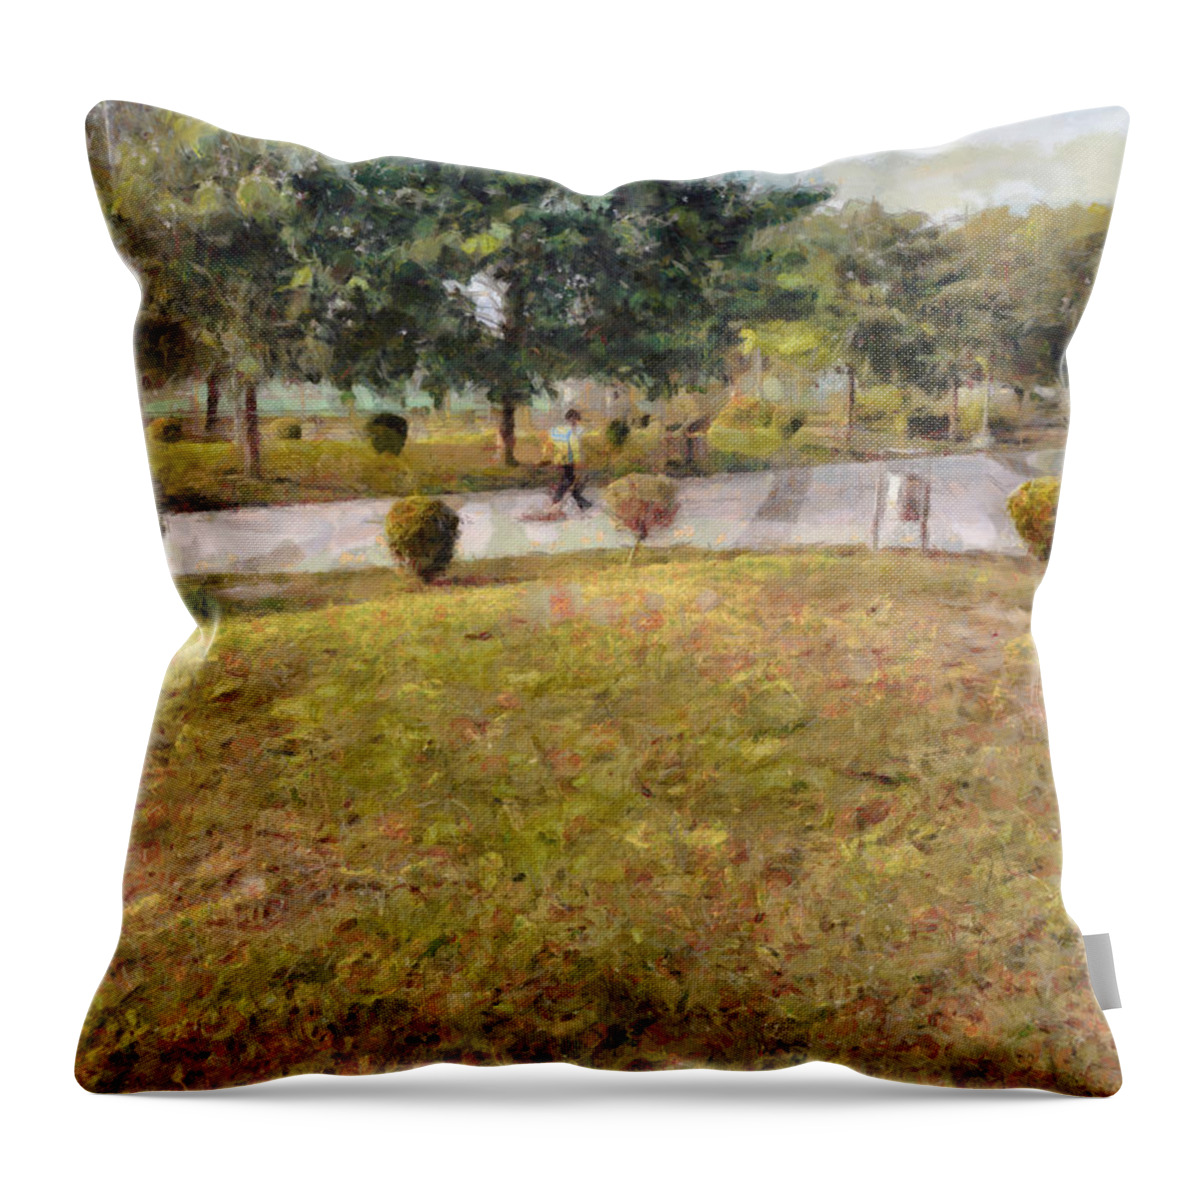 Walk Throw Pillow featuring the photograph Walking path and greenery by Ashish Agarwal